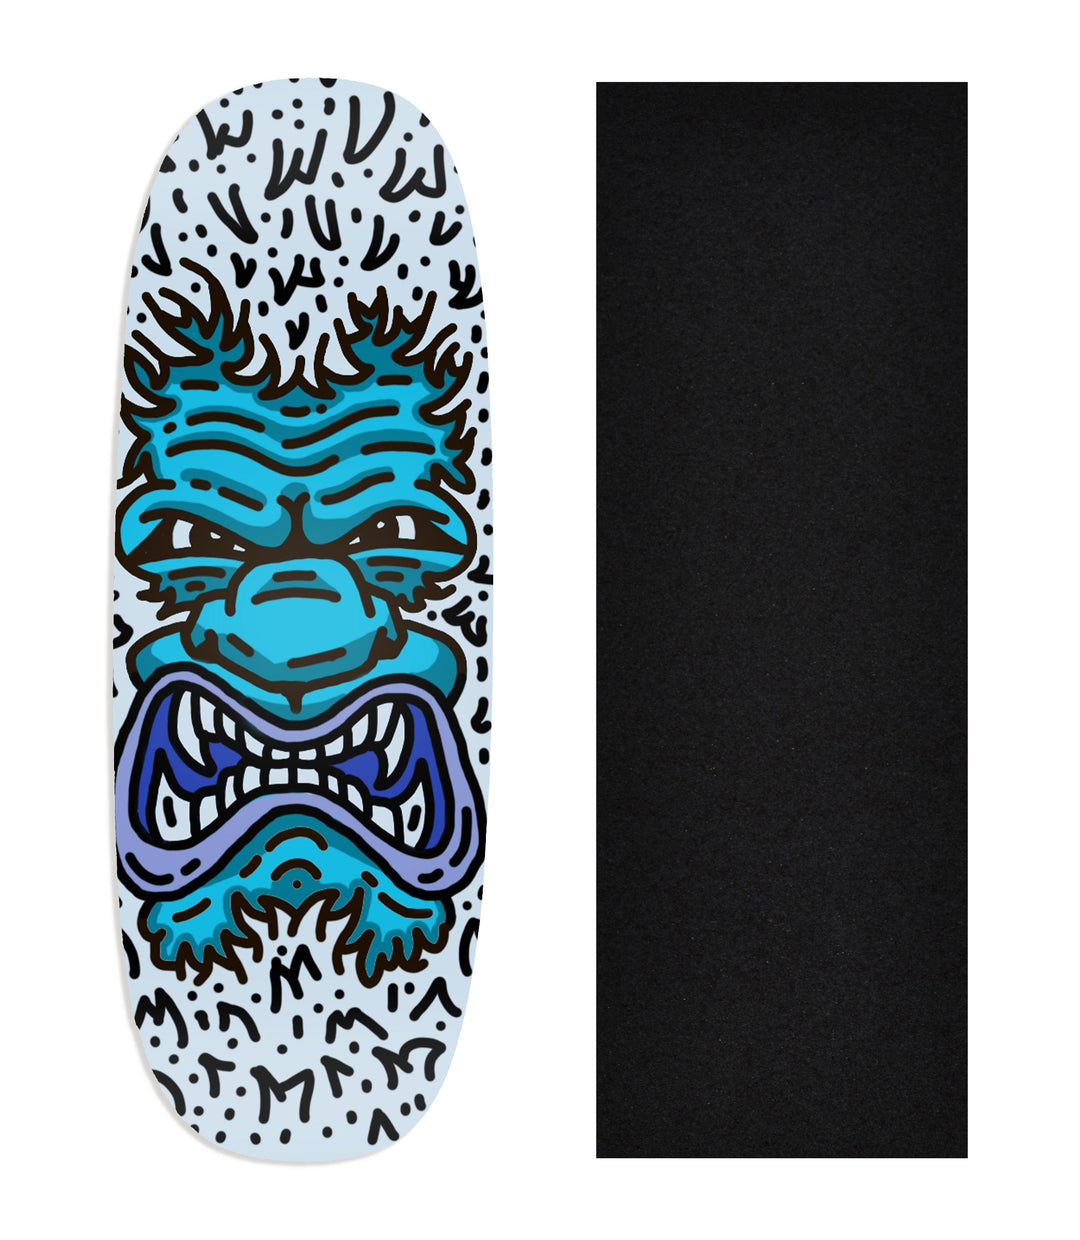 Teak Tuning Heat Transfer Graphic Wooden Fingerboard Deck, @sausage.ramps - Entry#96 Ohhh Deck